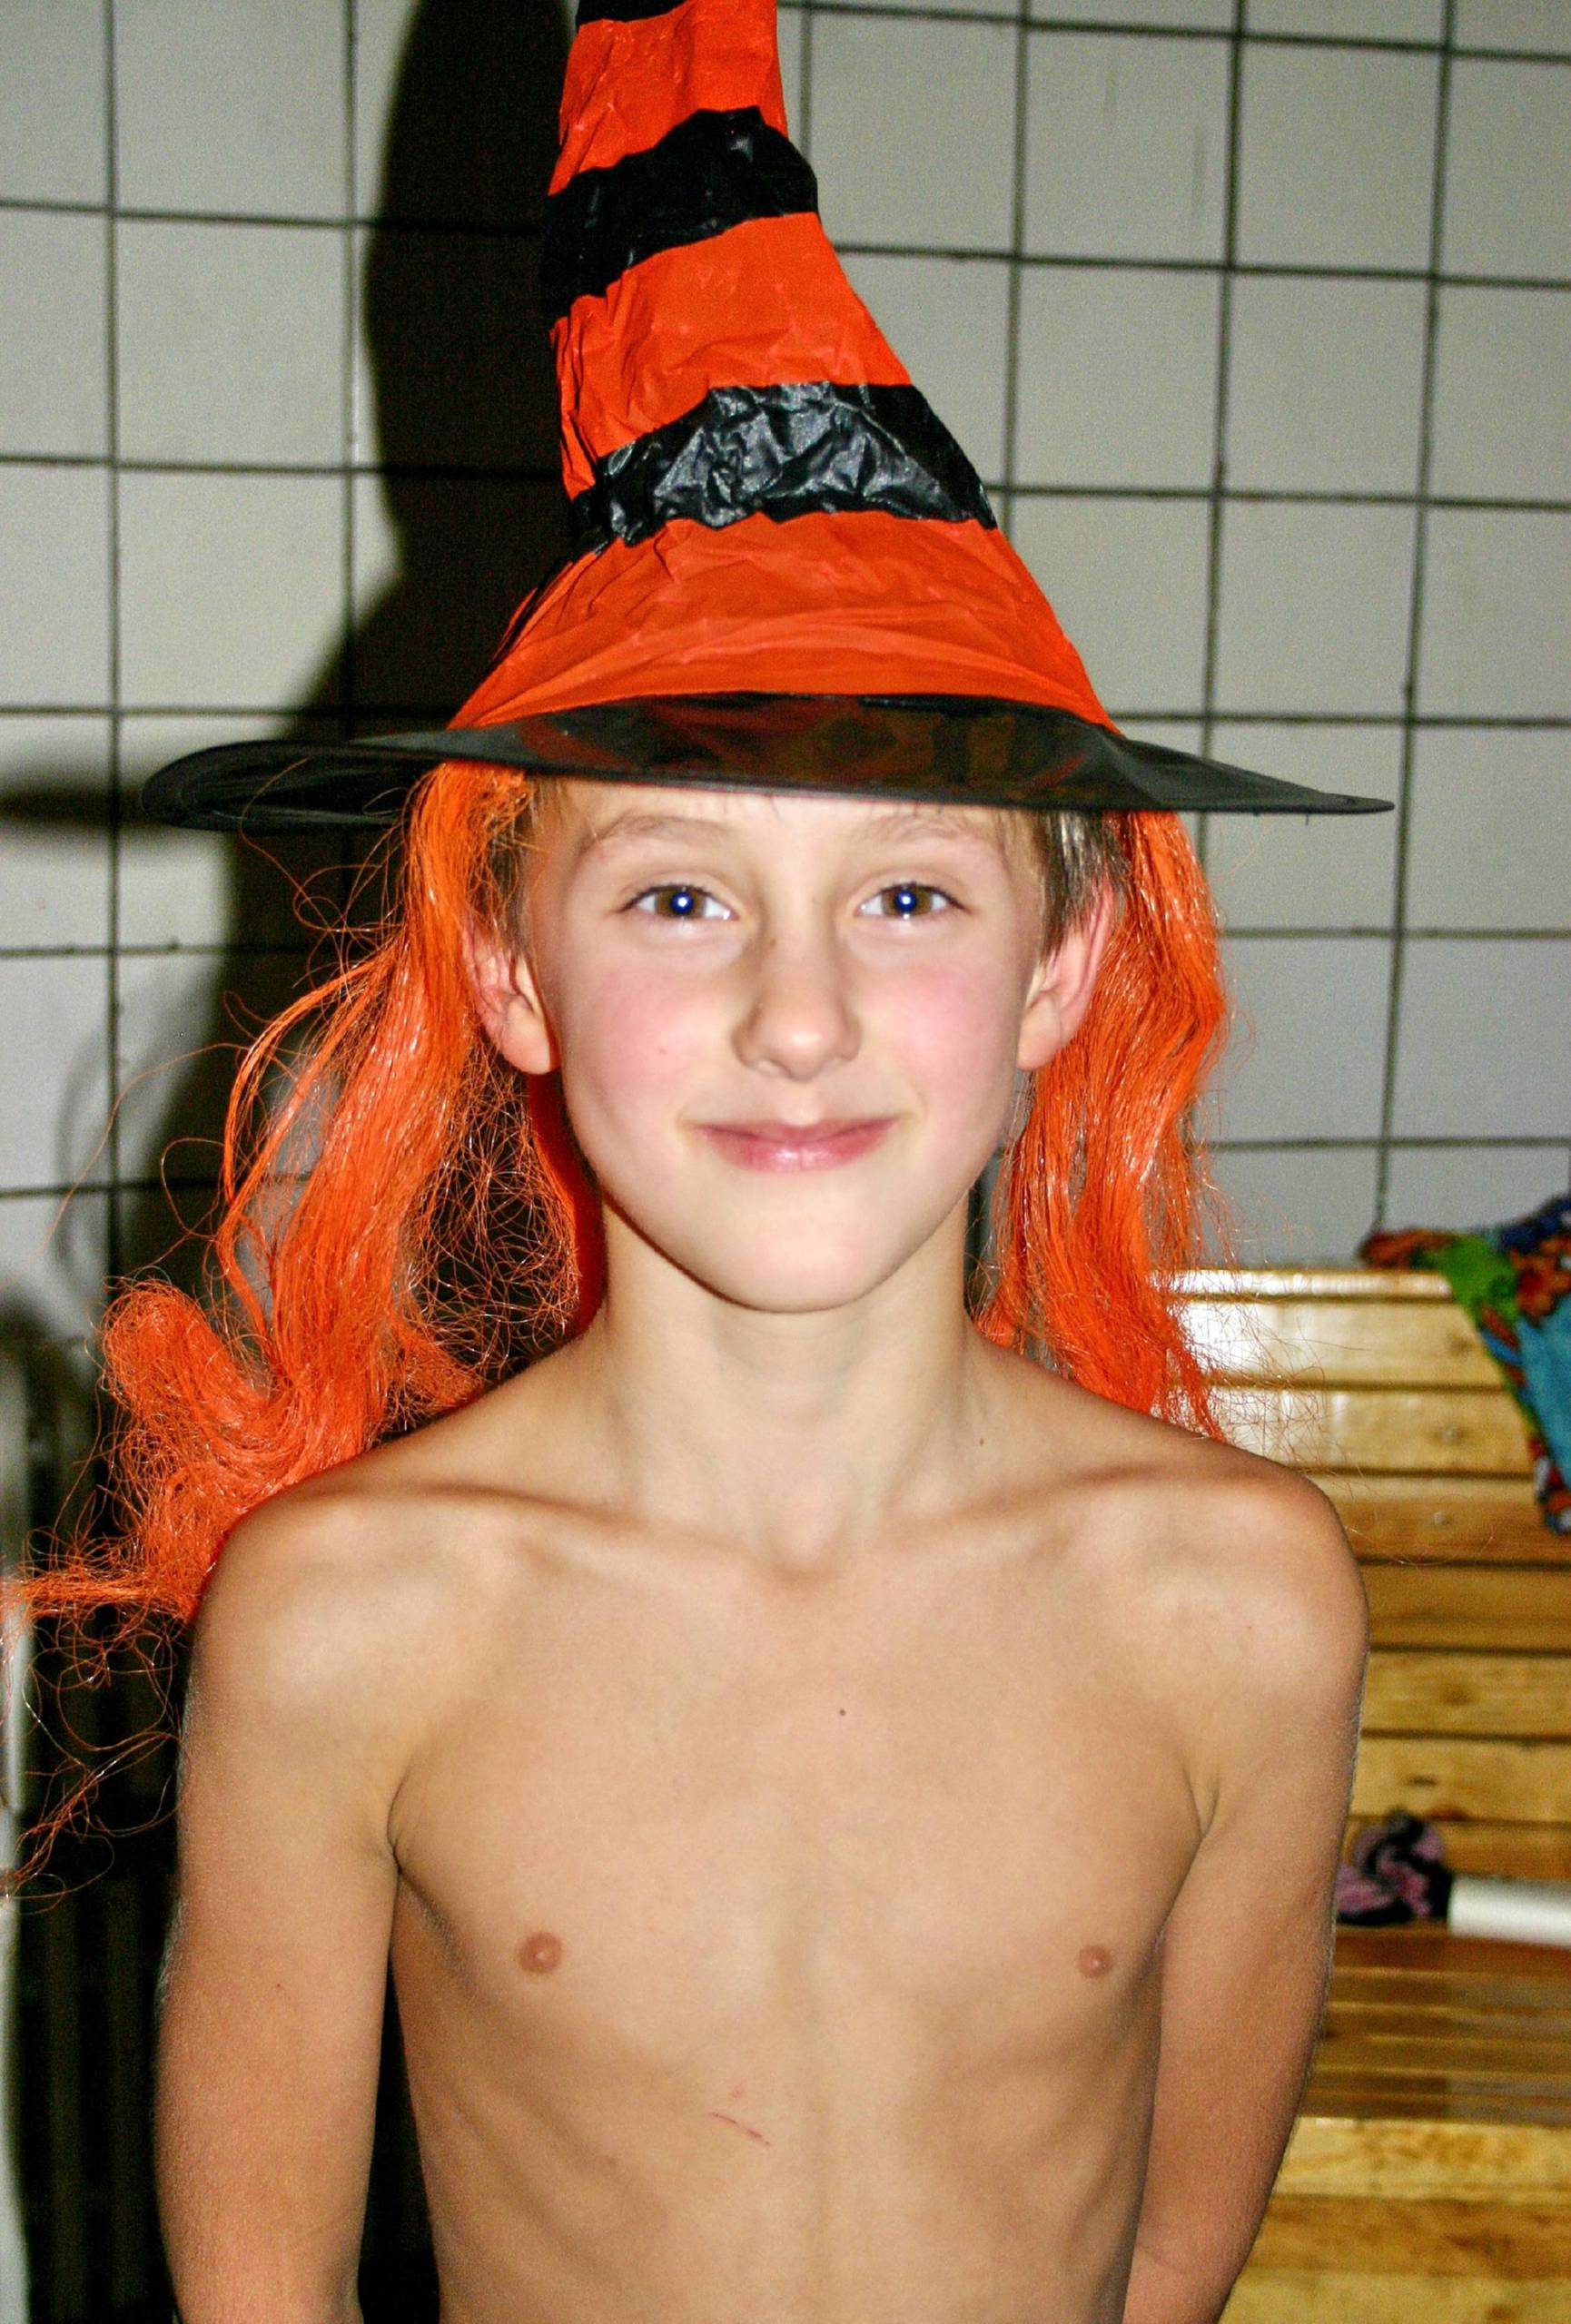 Halloween Hats and Devils - 2